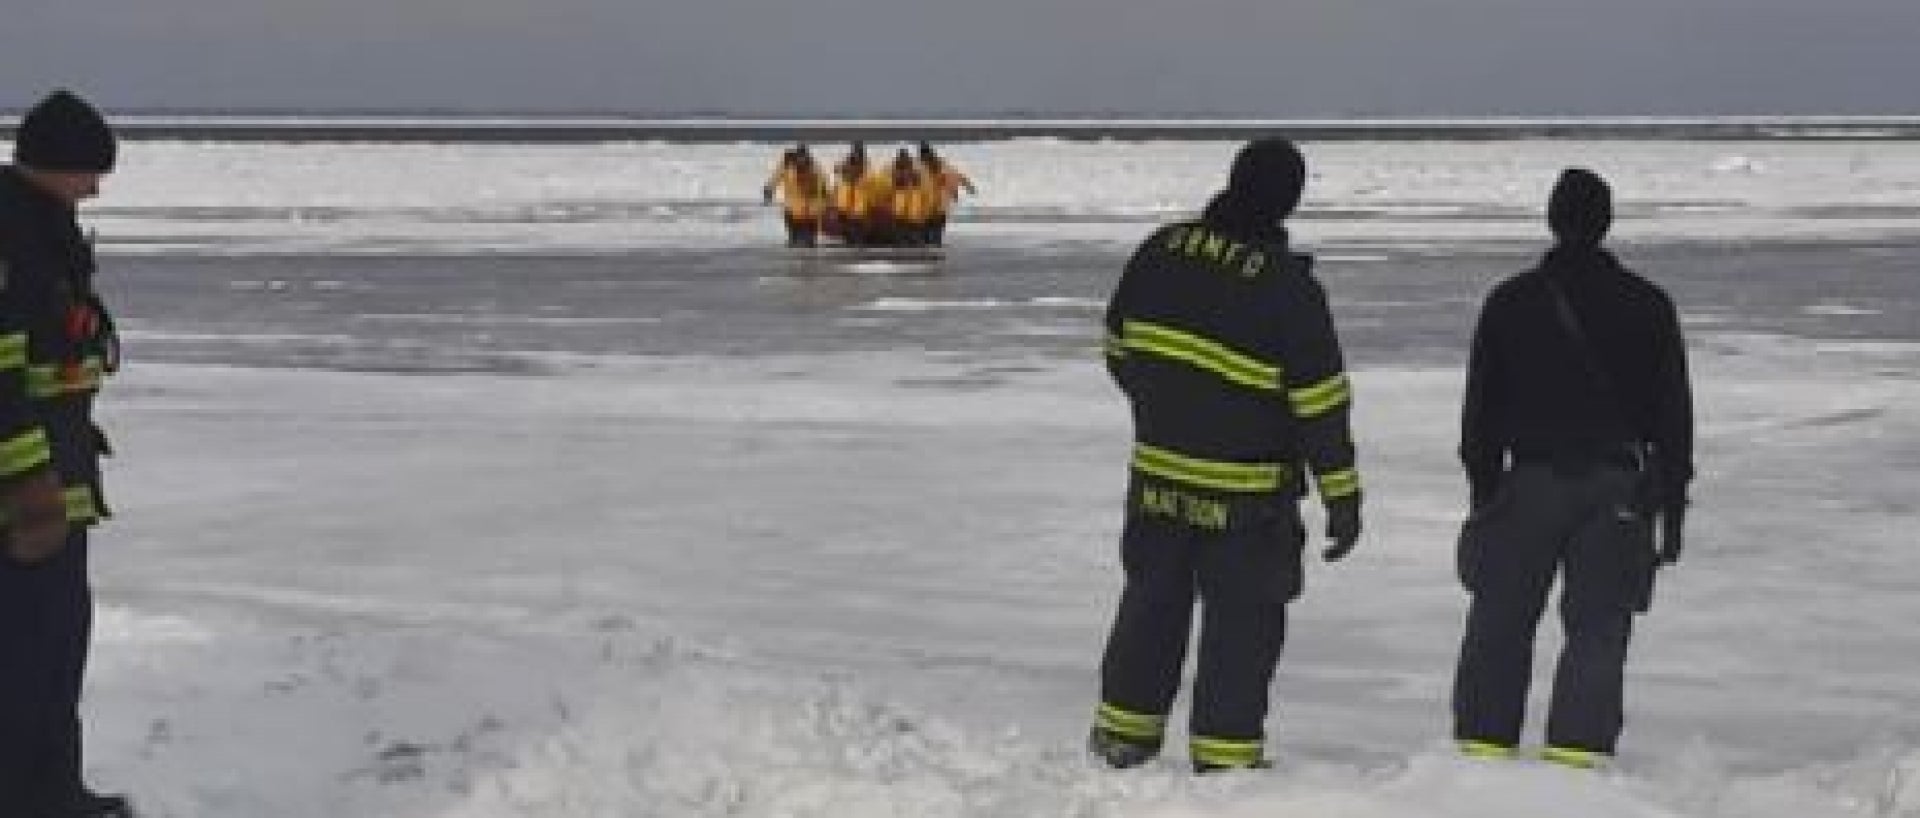 27 people were rescued from ice chunk floating off Green Bay.